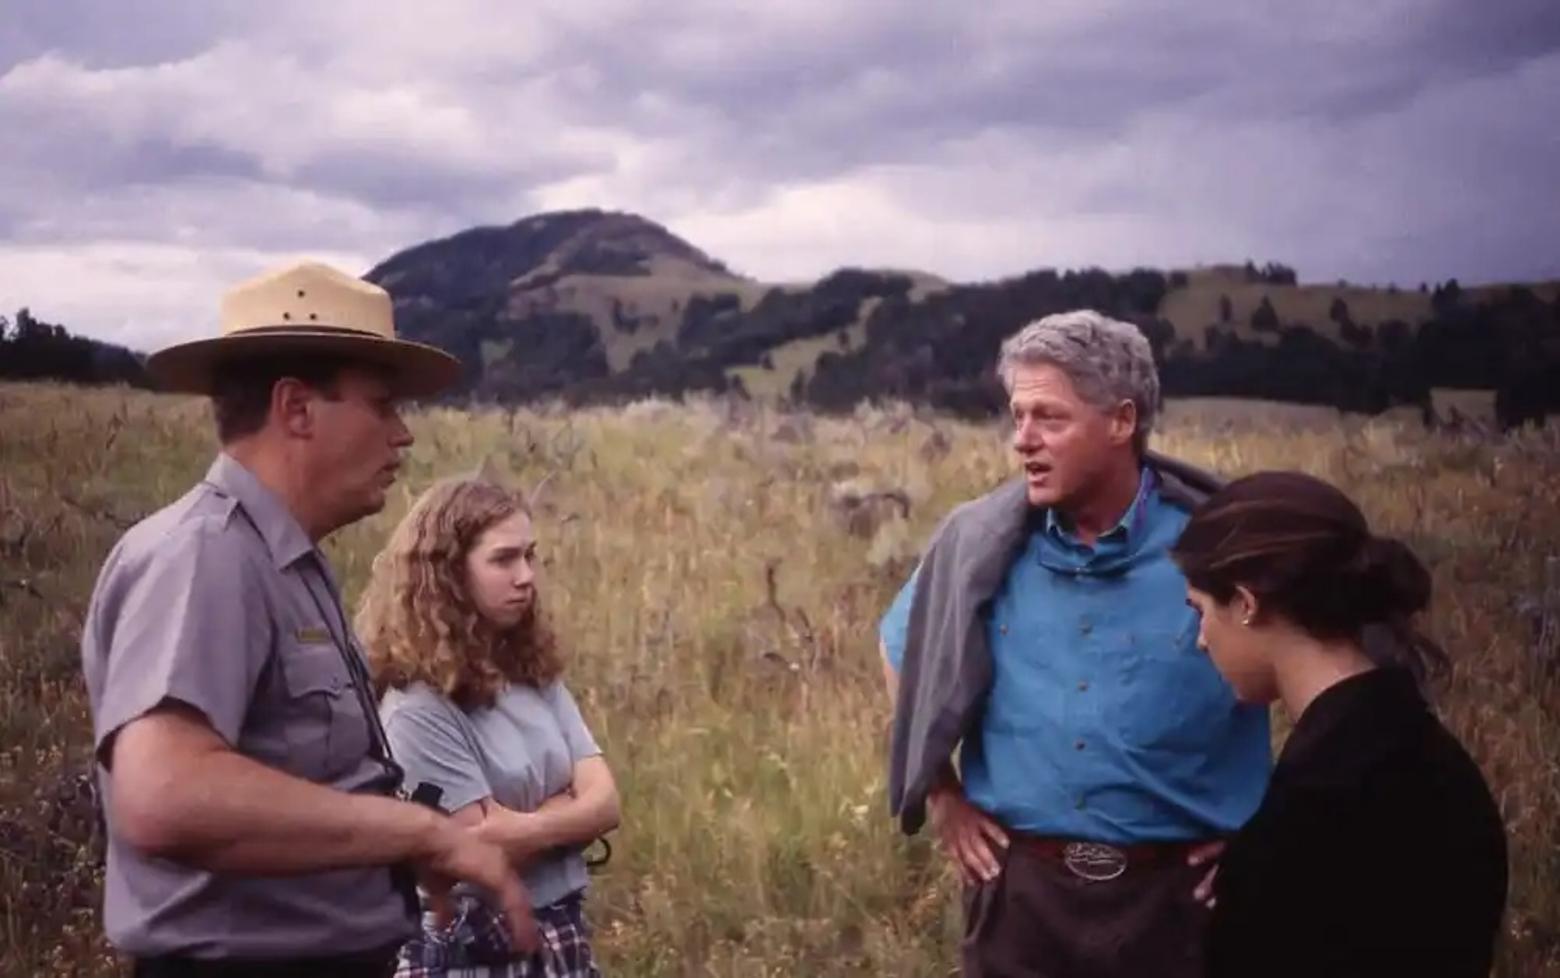 Finley briefs Bill Clinton and his daughter Chelsea during a visit to Yellowstone when Clinton was in office. Photo courtesy NPS